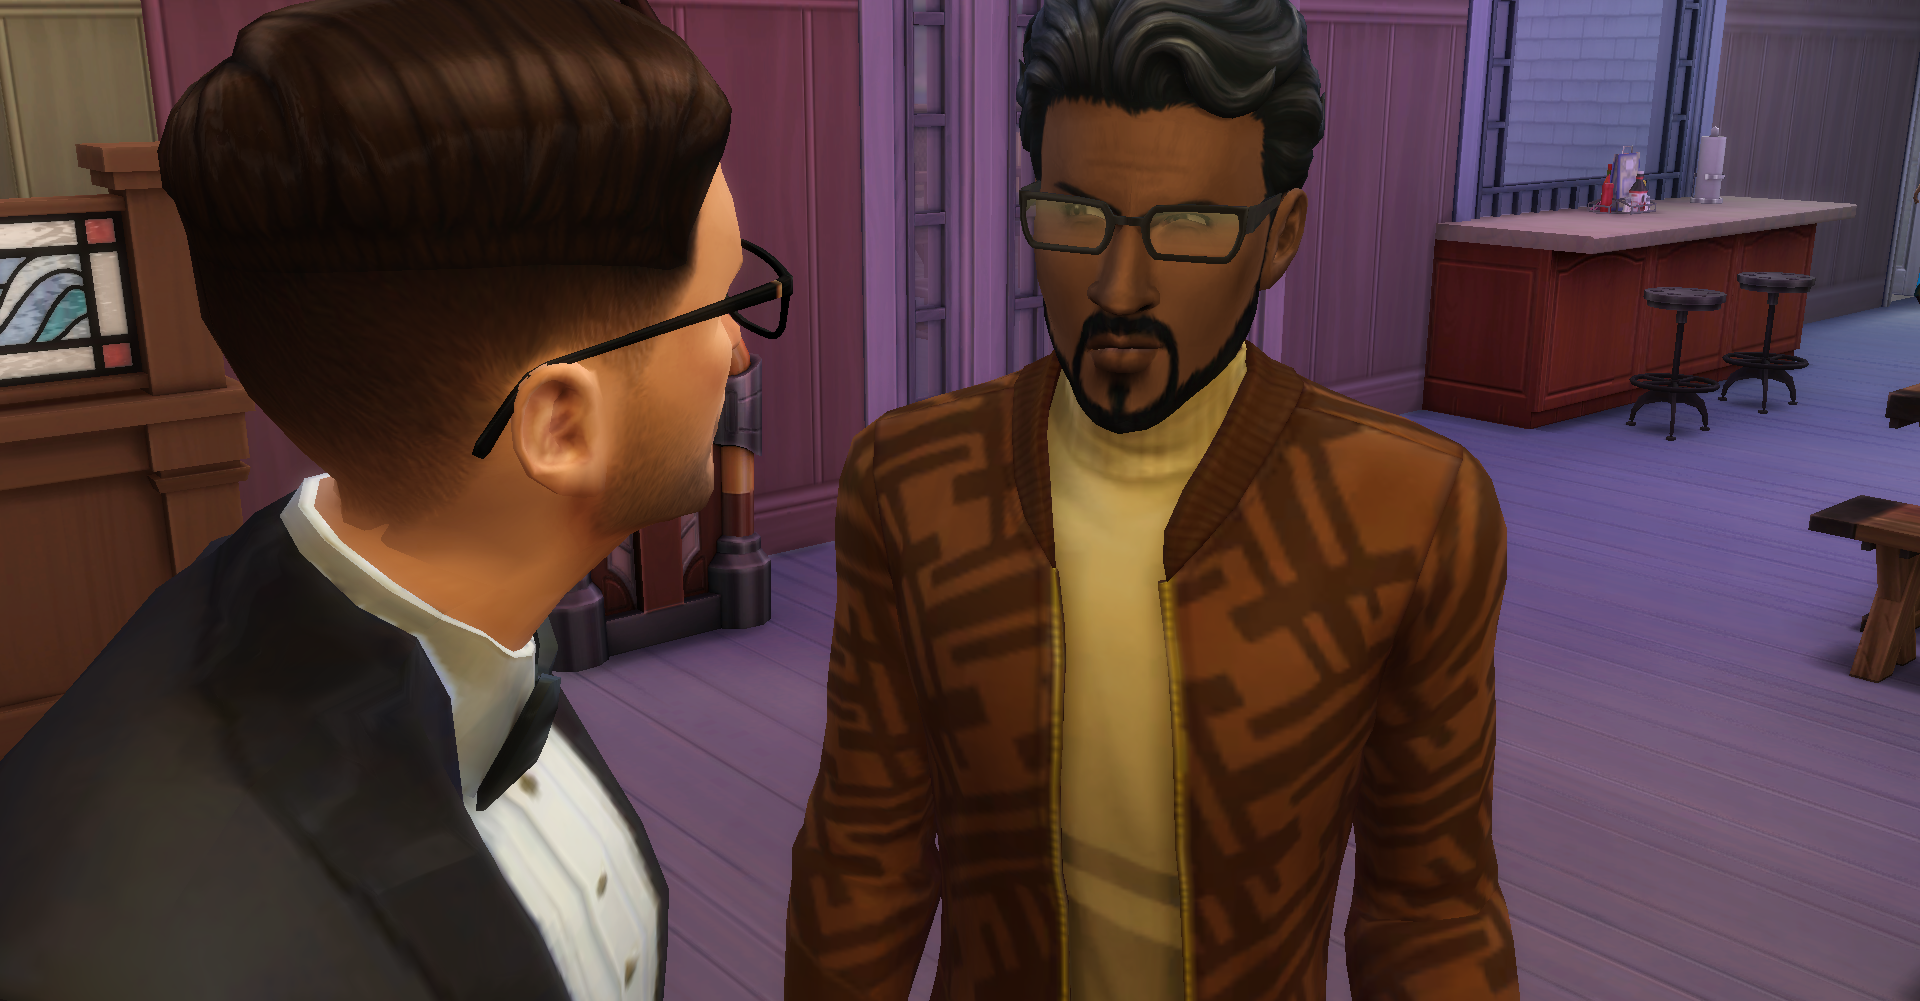 Hot Complications Sims Story Page 5 The Sims 4 General Discussion 